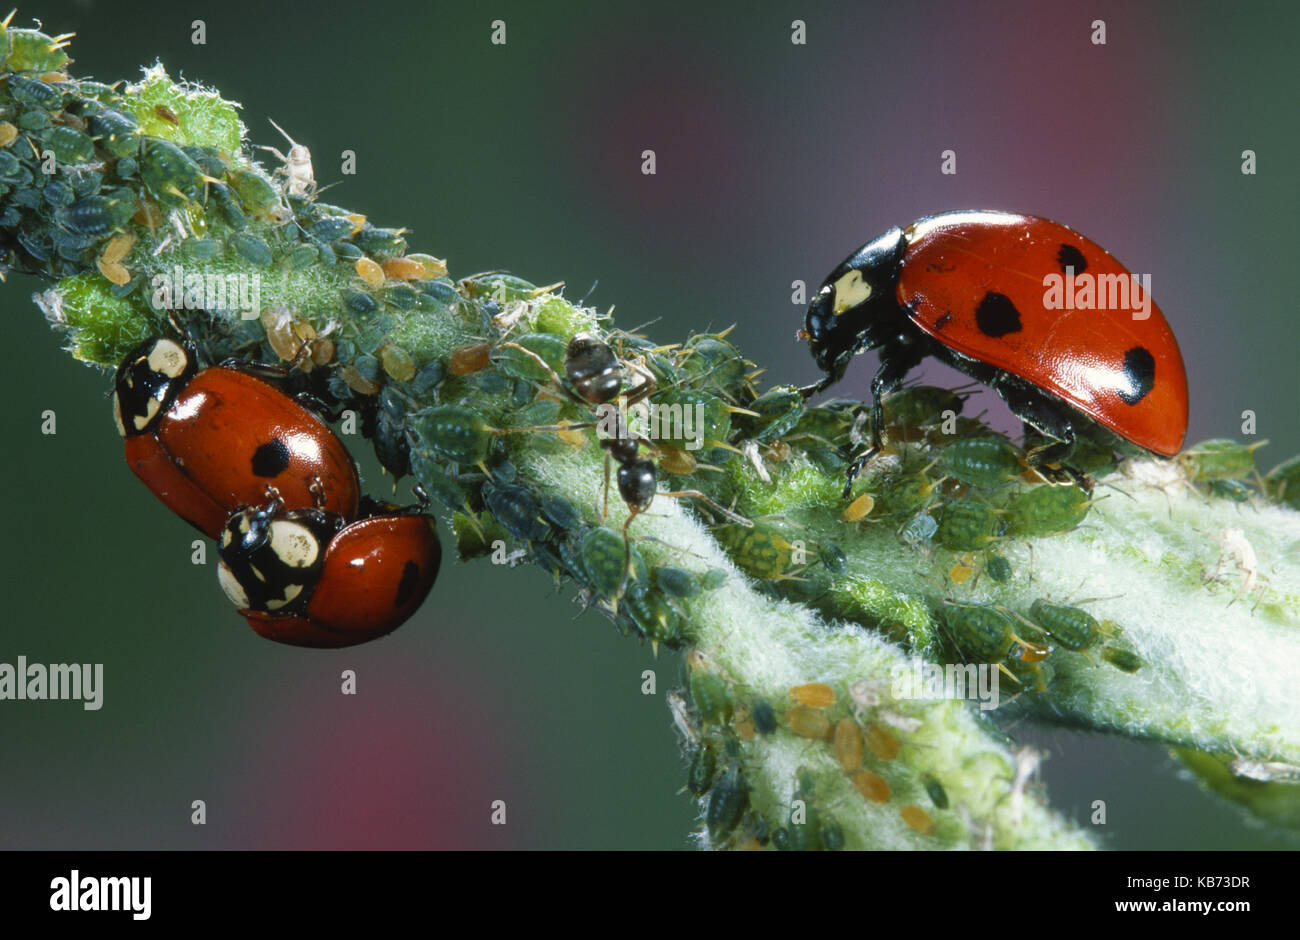 Seven-spot Ladybird (Coccinella Septempunctata) and Two-spotted Ladybeetle (Adalia bipunctata) pair on a stem with aphids and an ant, Belgium Stock Photo